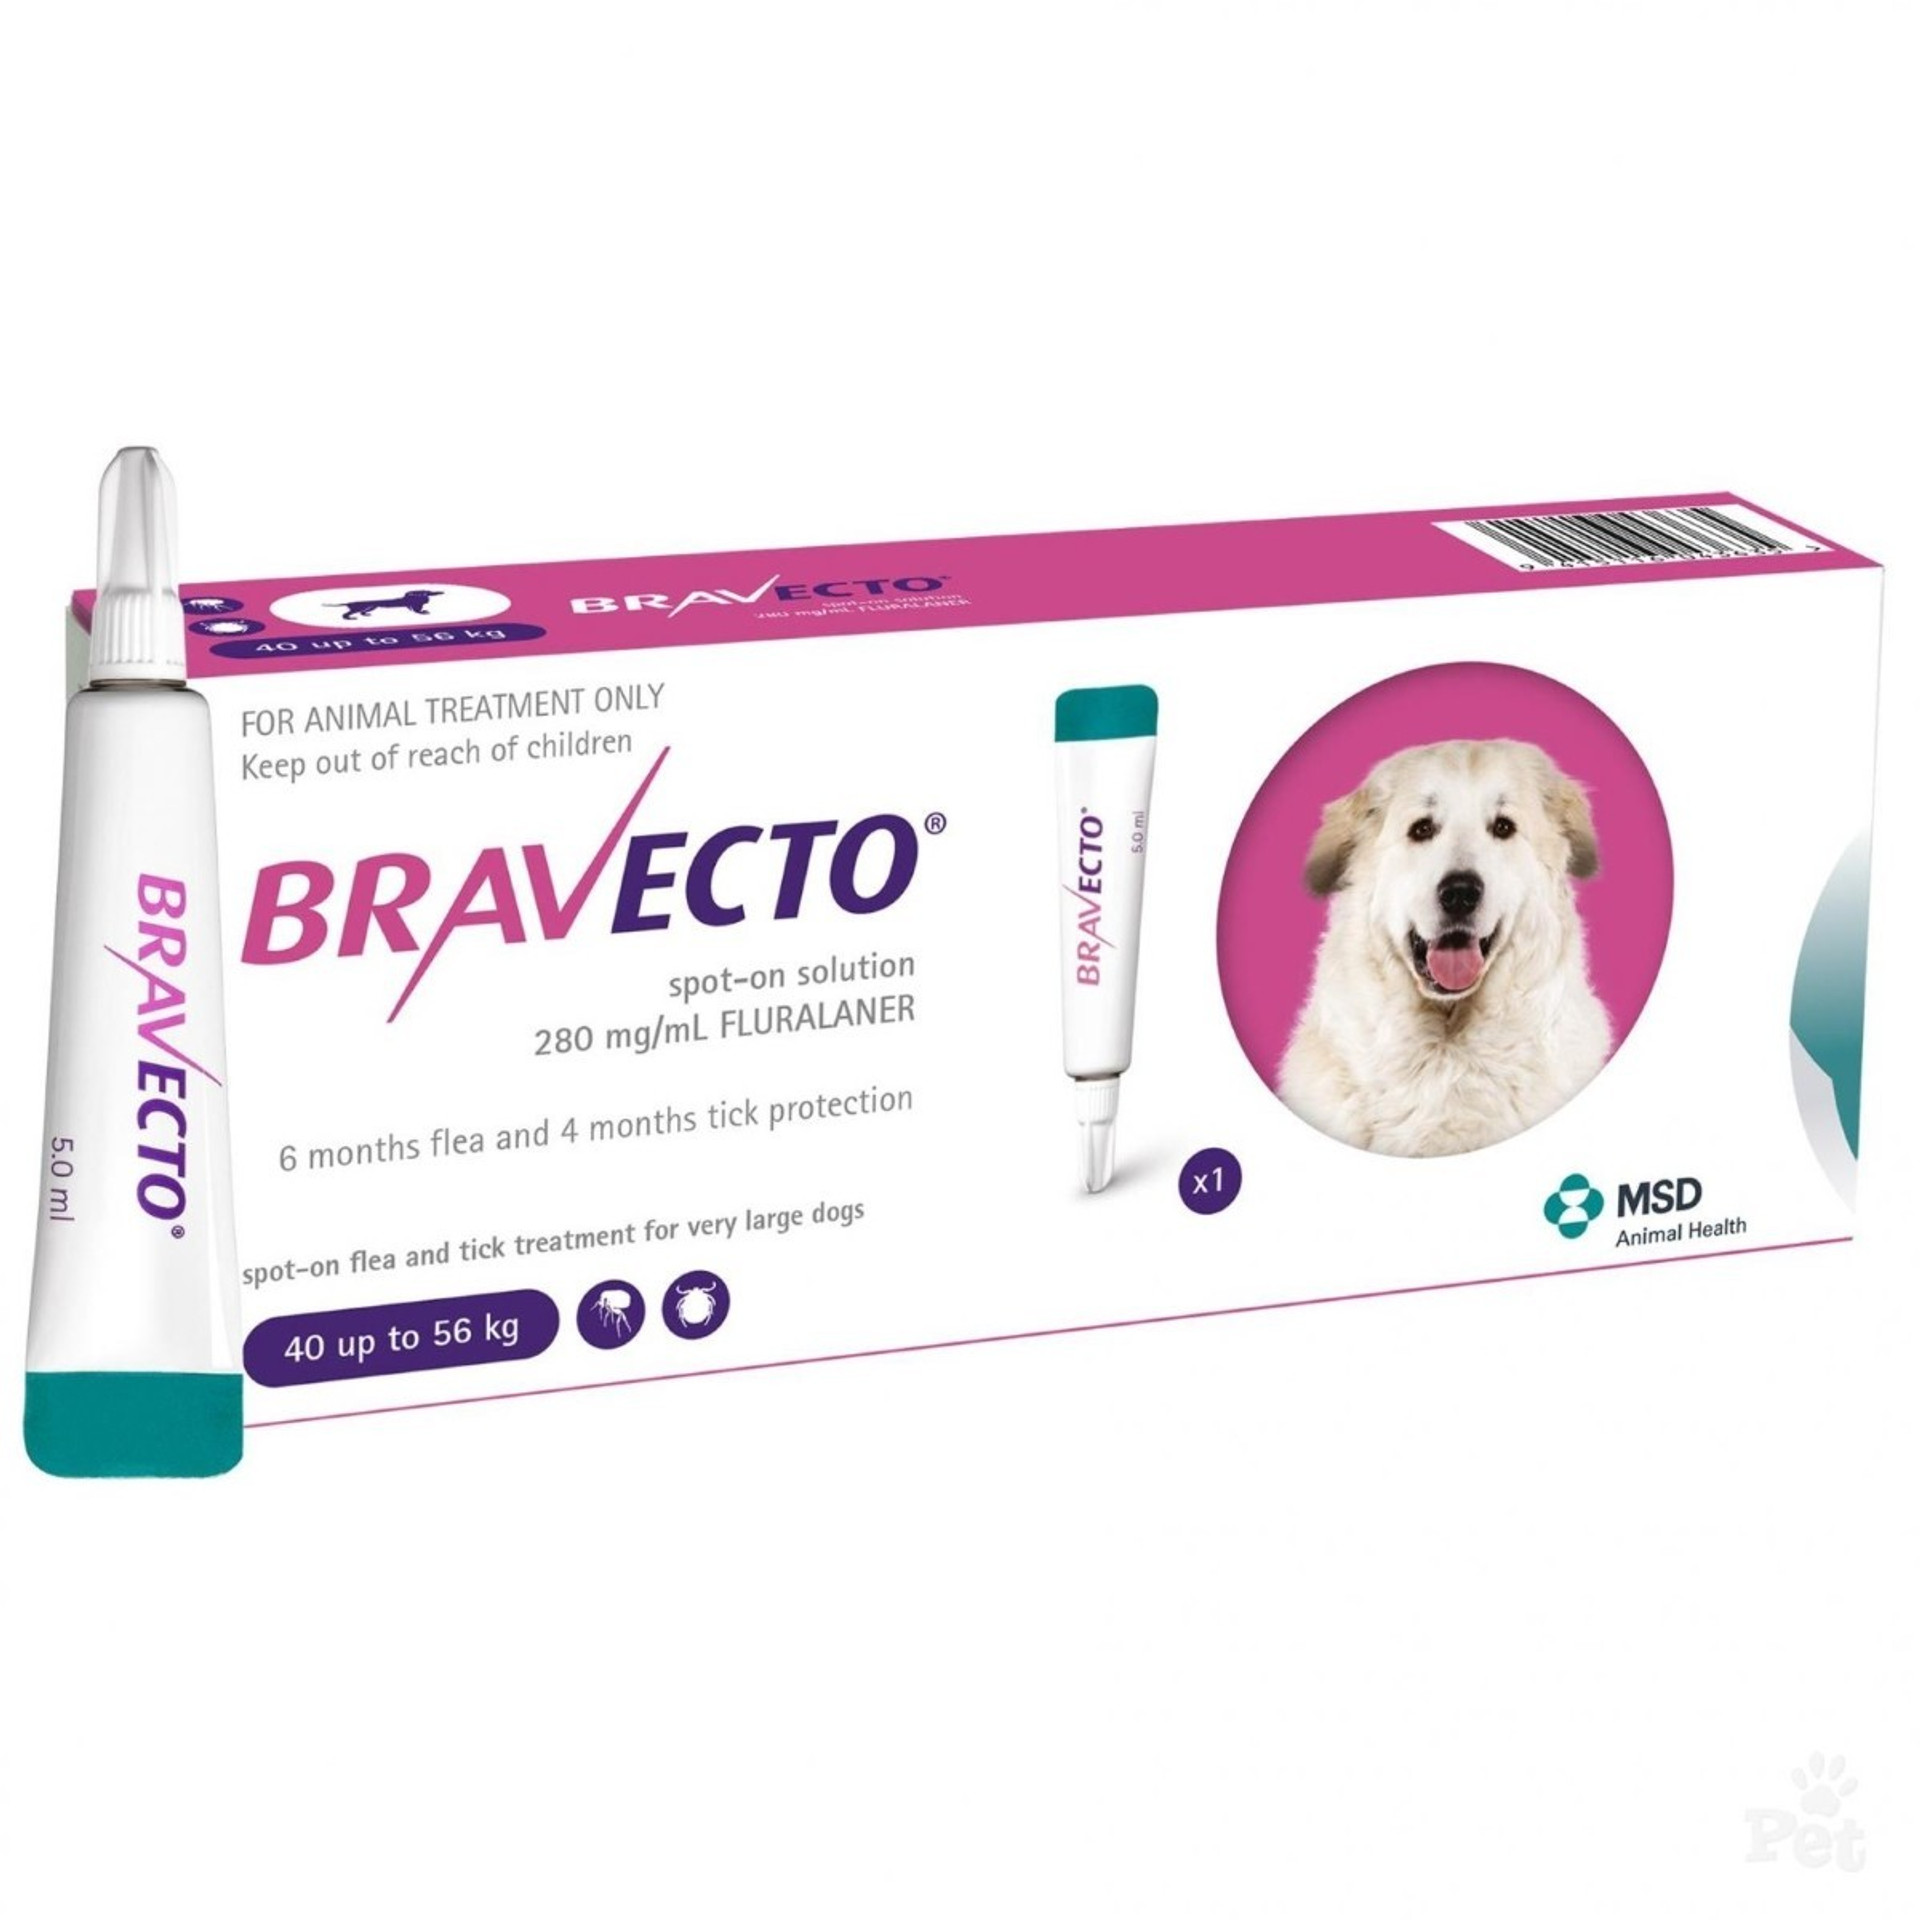 Bravecto Topical Solution for Dogs 88-123 lbs (40-56 kg) - Pink 1 Dose